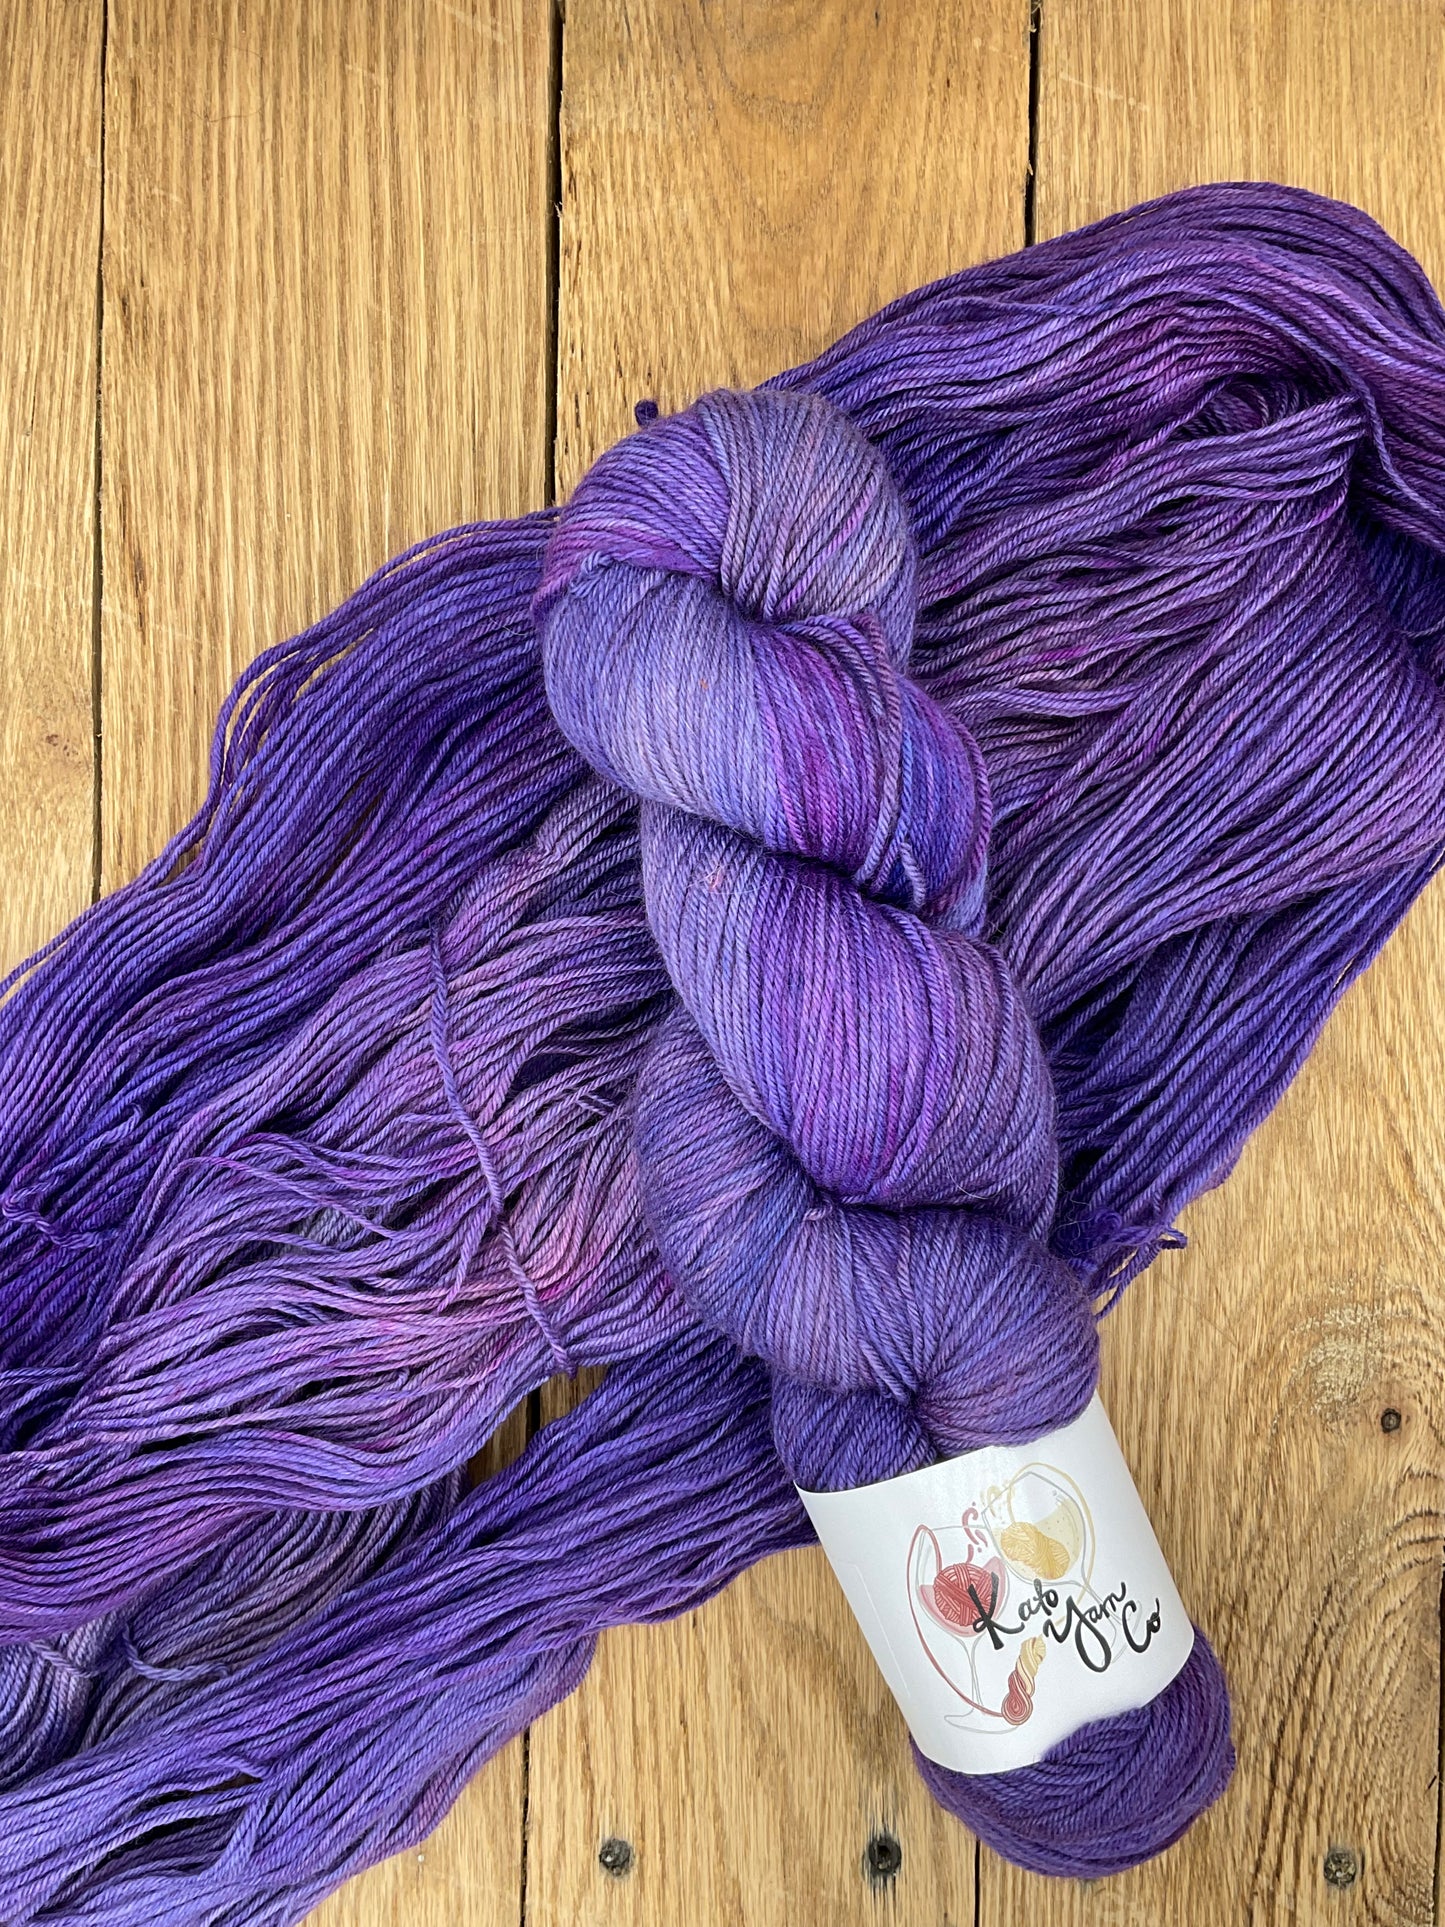 Purple One of a Kind - 100% Merino Fingering Weight